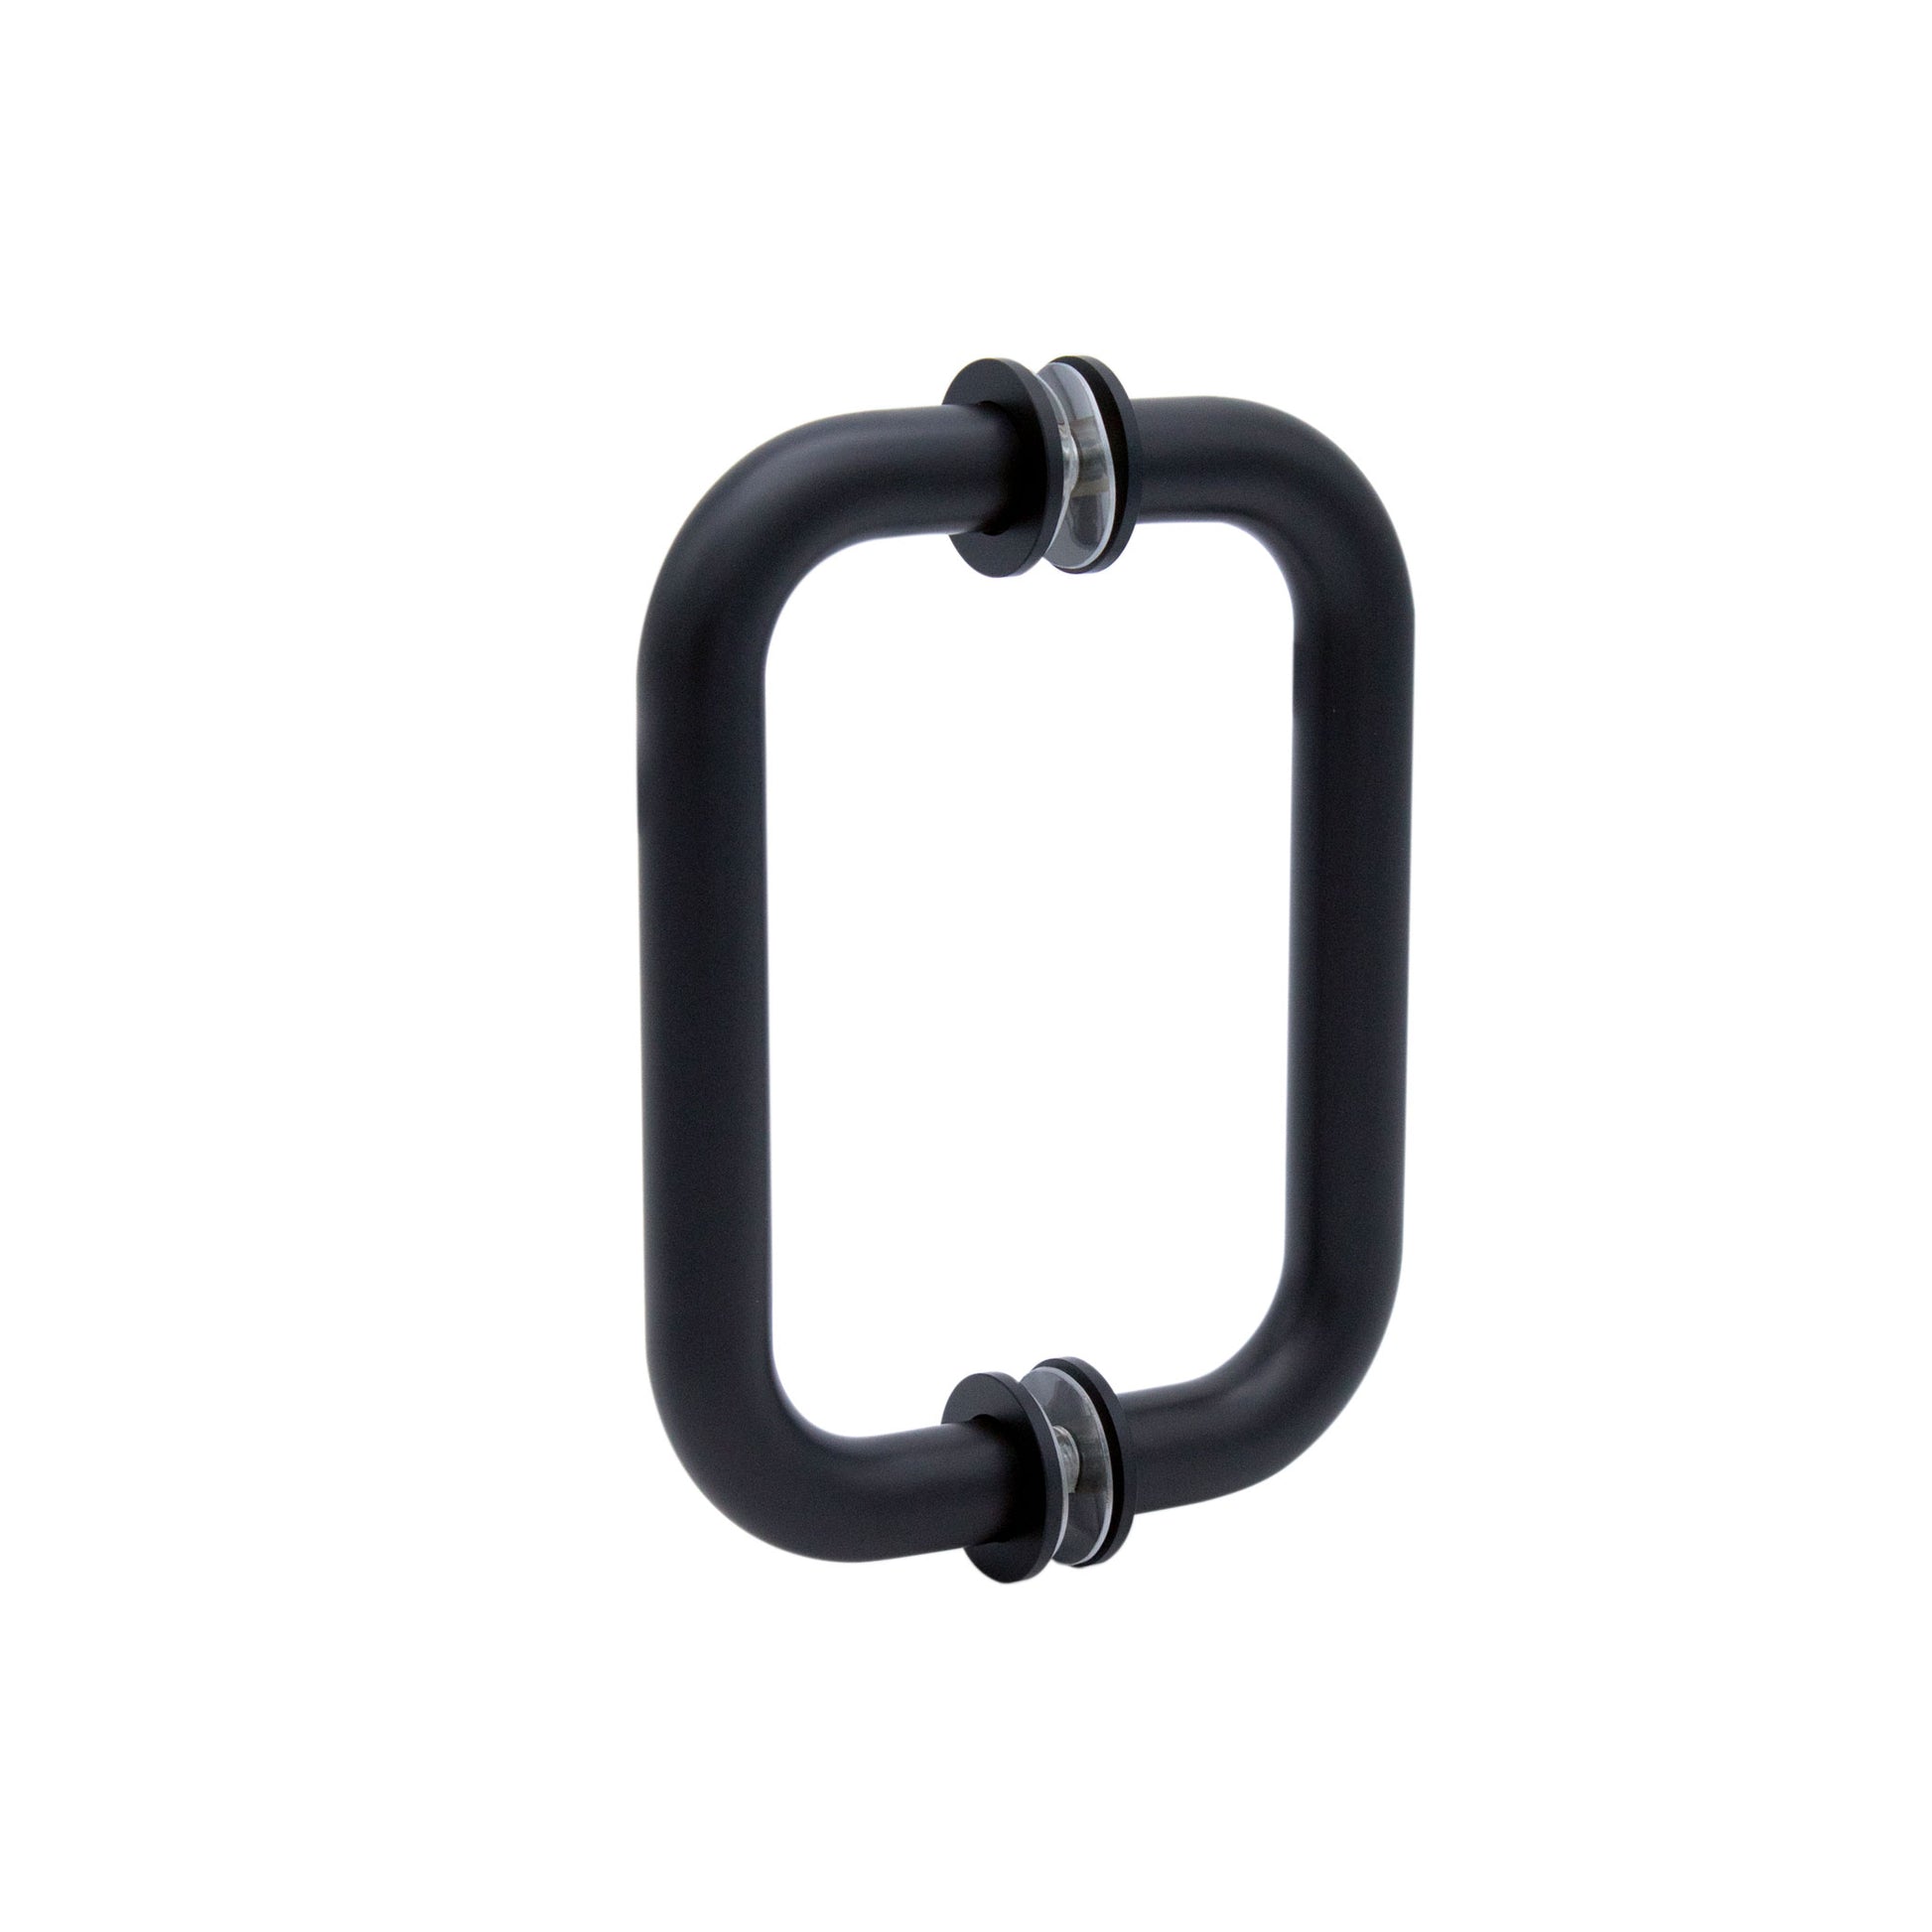 6" / Matte Black | Classic Back-to-Back Shower Door Pull Handle with Washers